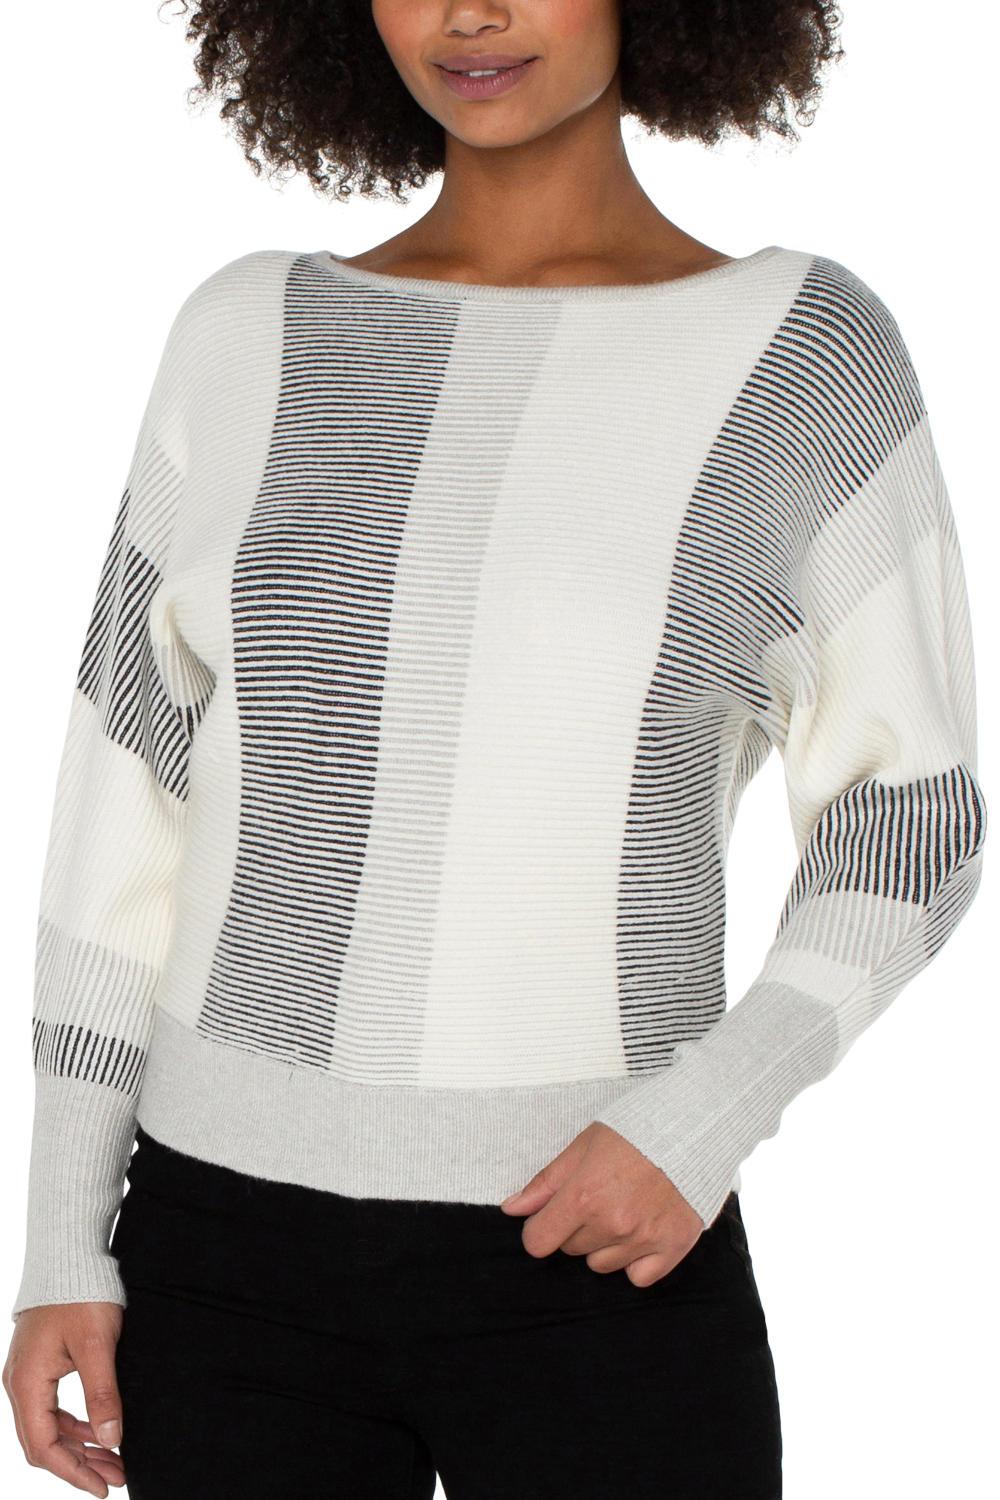 Colorblock Boat Neck Sweater - Strawberry Moon Boutique